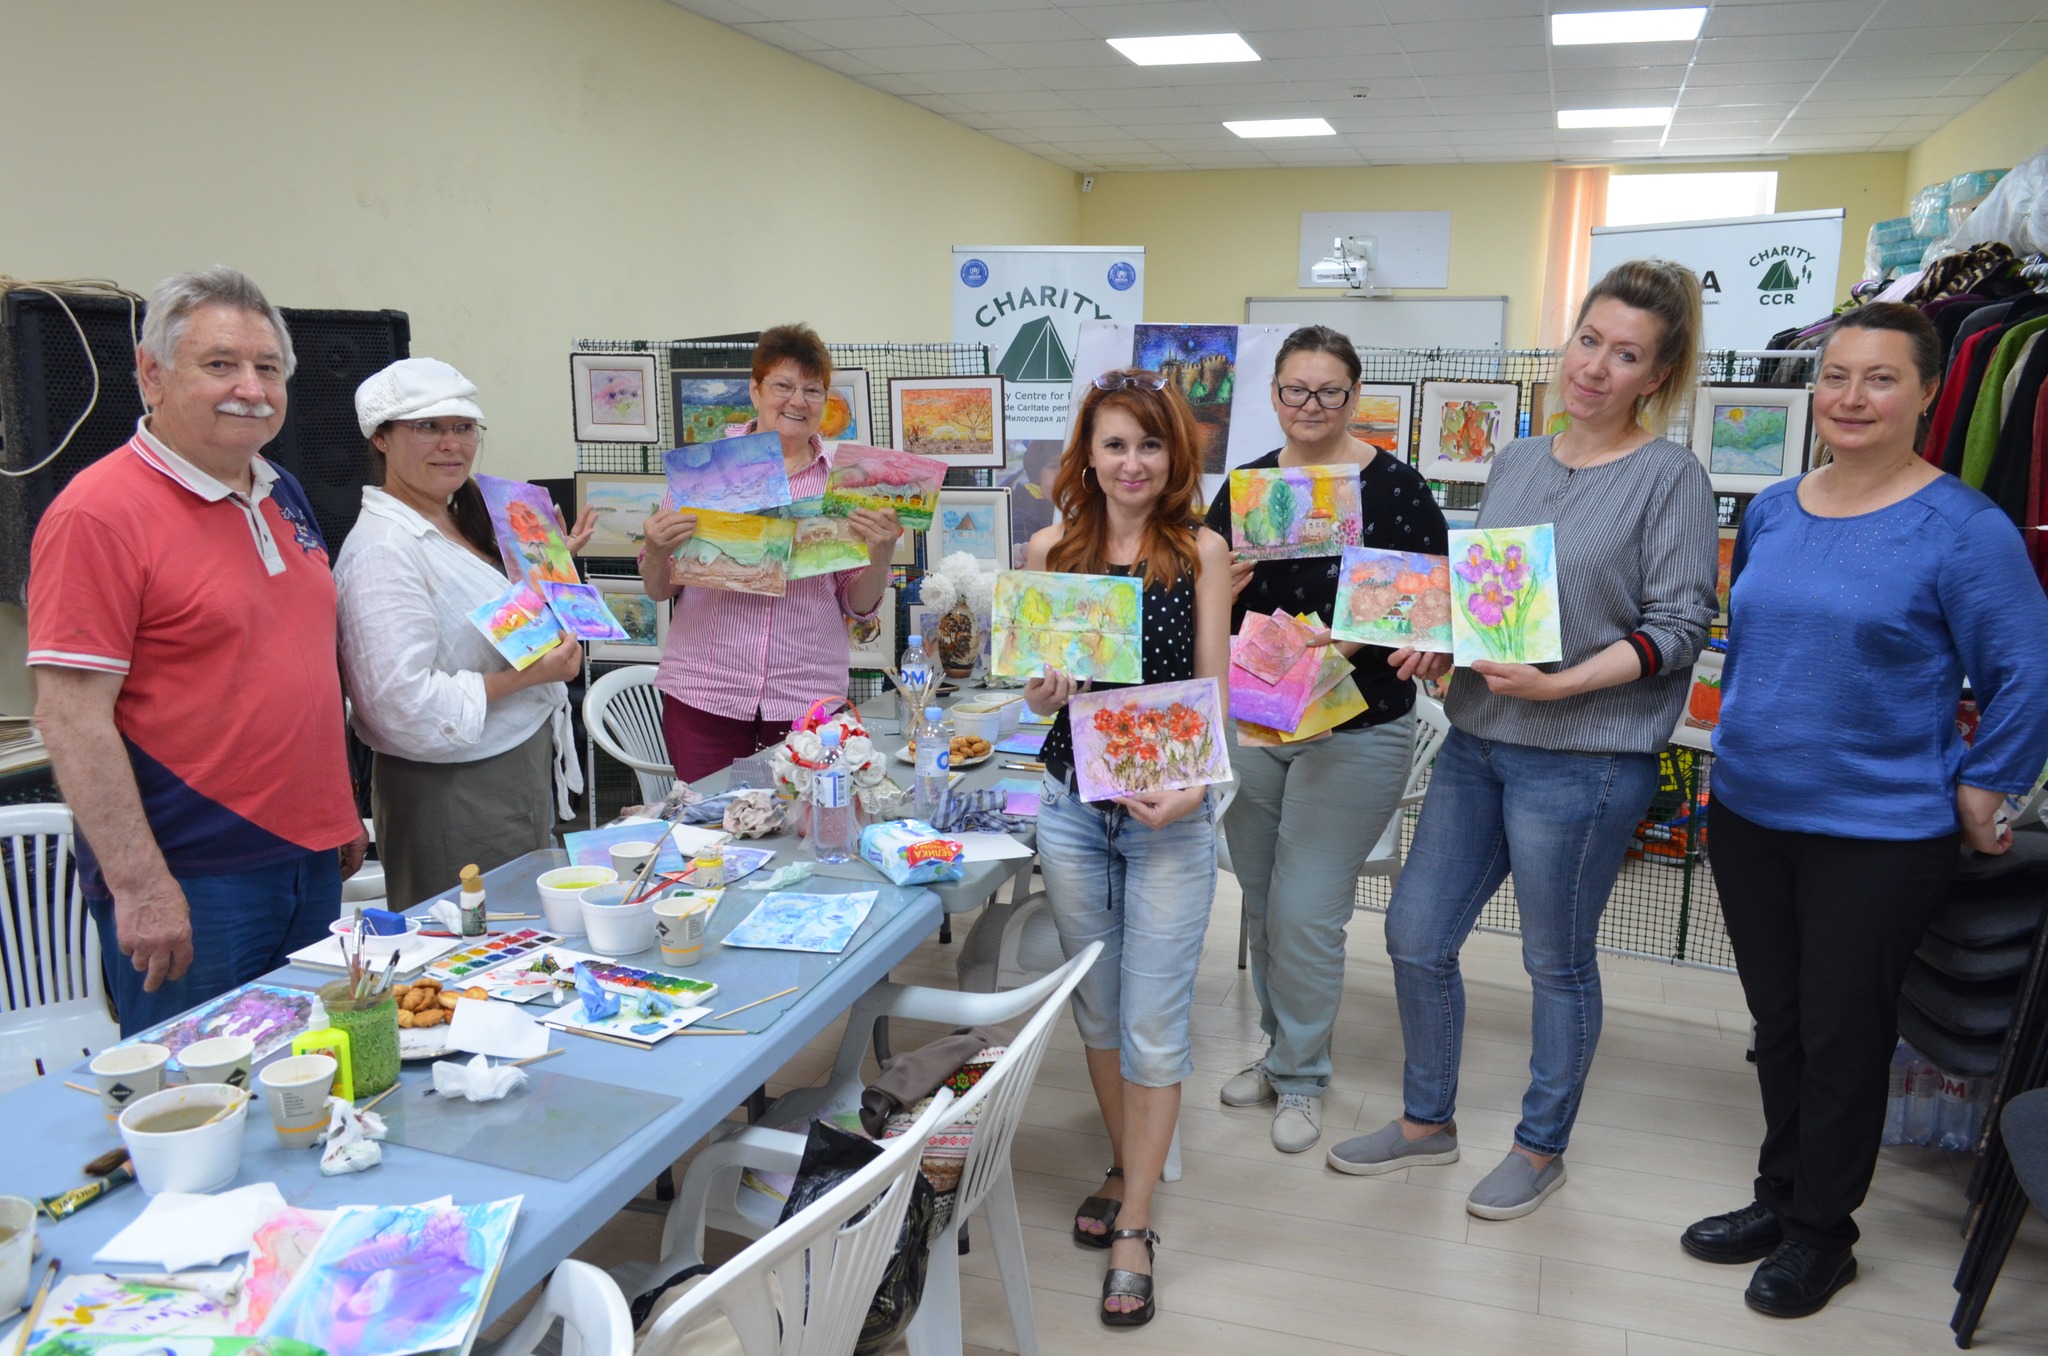 You are currently viewing Painting workshops in the framework of CCR-Mercy Corps partnership